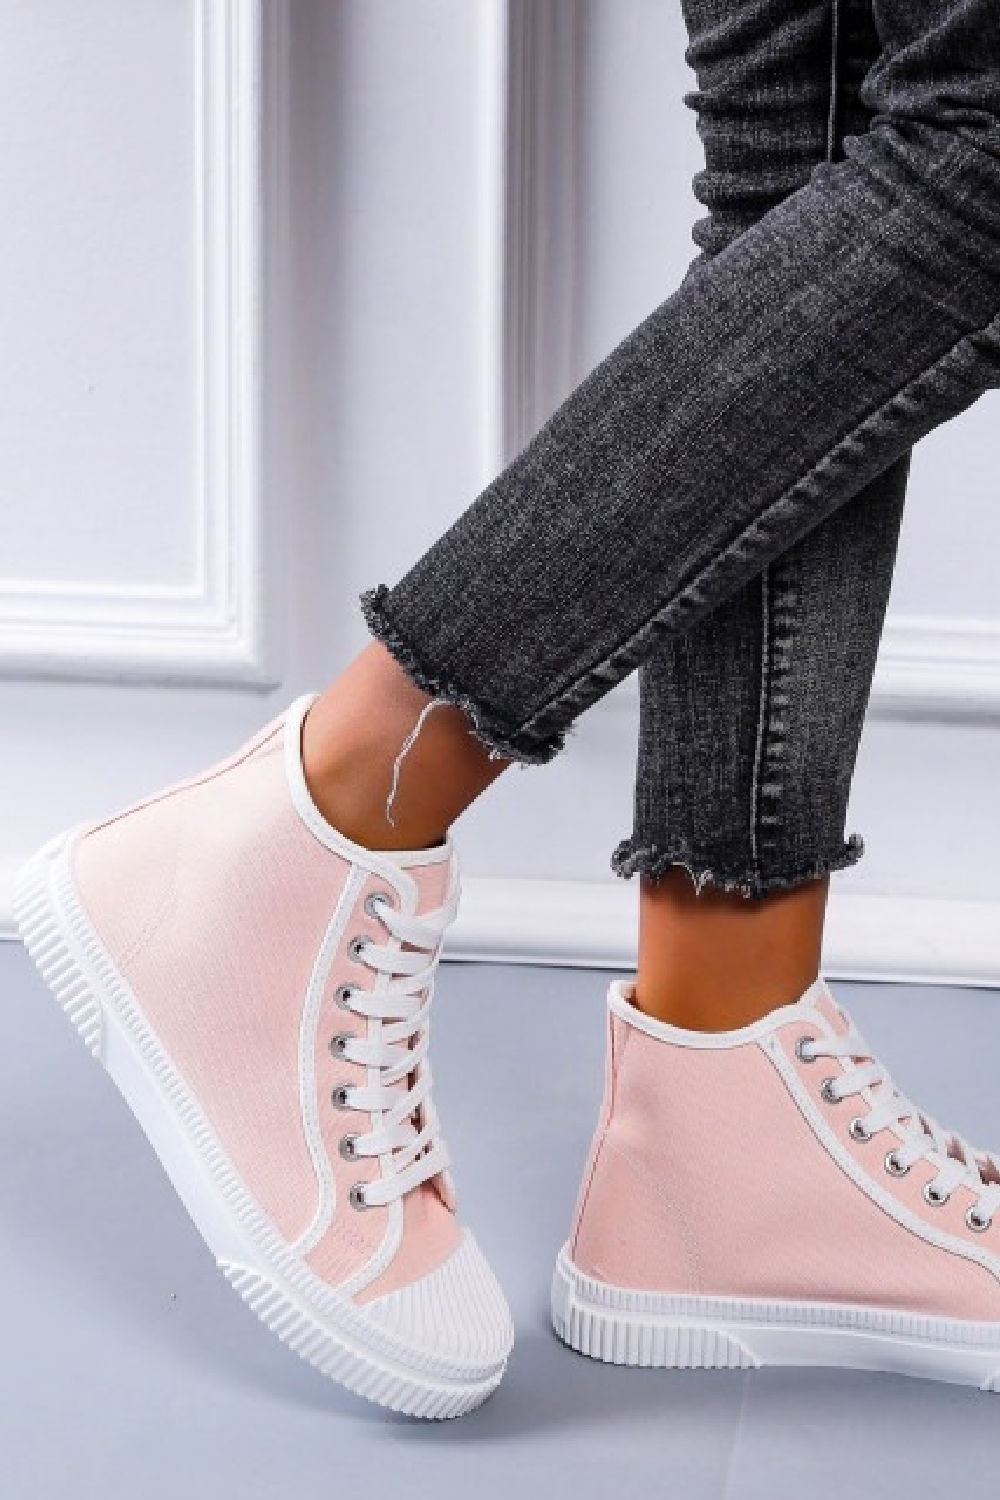 PINK LACE UP FLAT HIGH TOP SNEAKERS